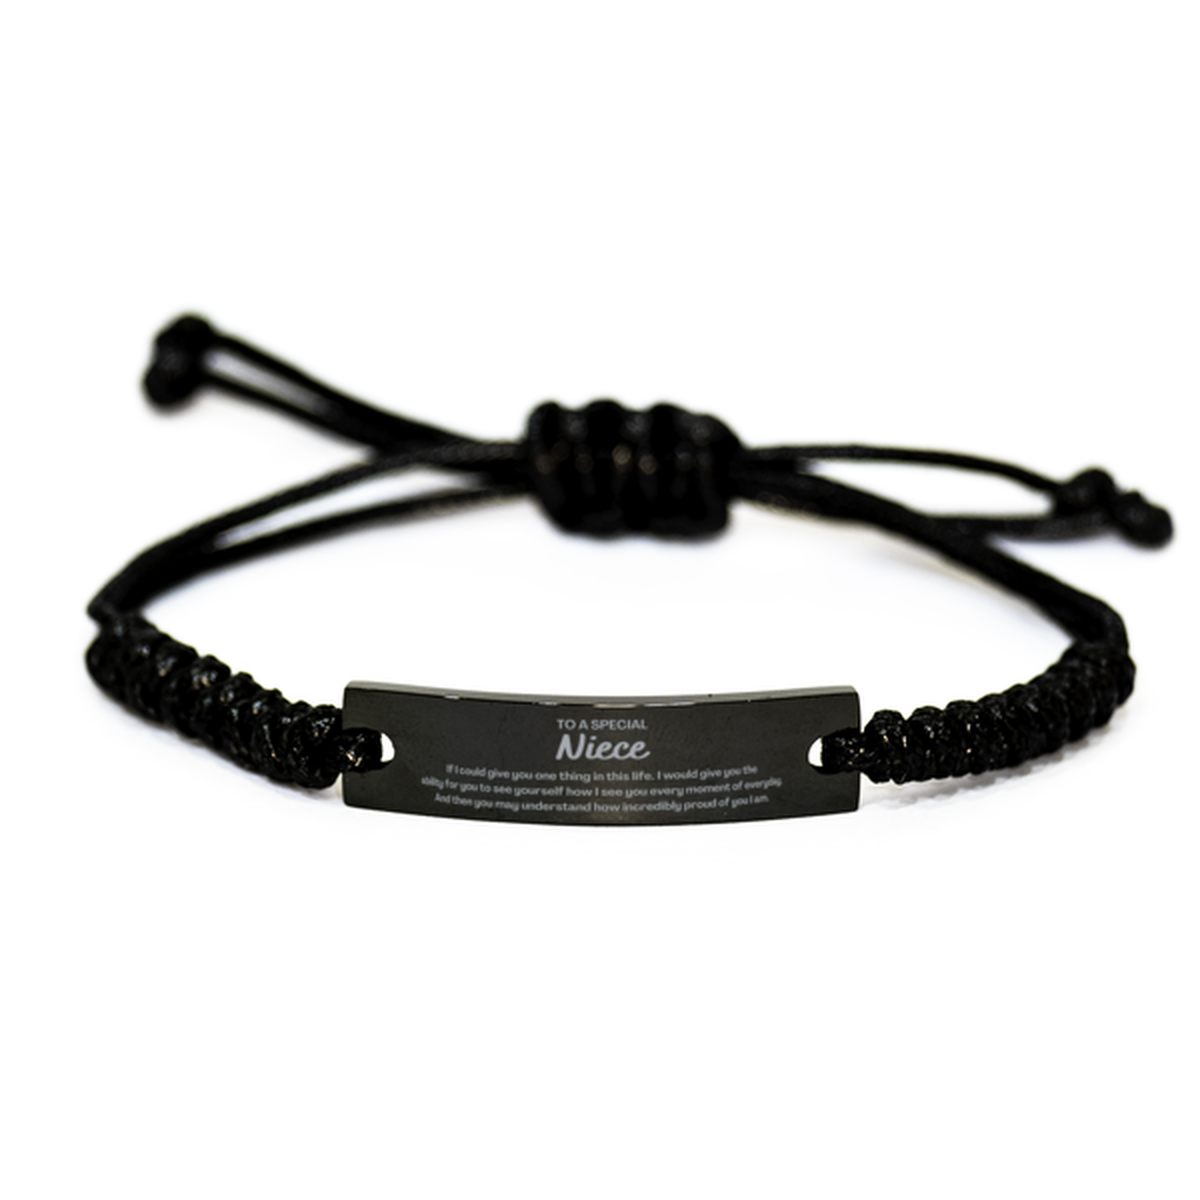 To My Niece Black Rope Bracelet, Gifts For Niece Engraved, Inspirational Gifts for Christmas Birthday, Epic Gifts for Niece To A Special Niece how incredibly proud of you I am